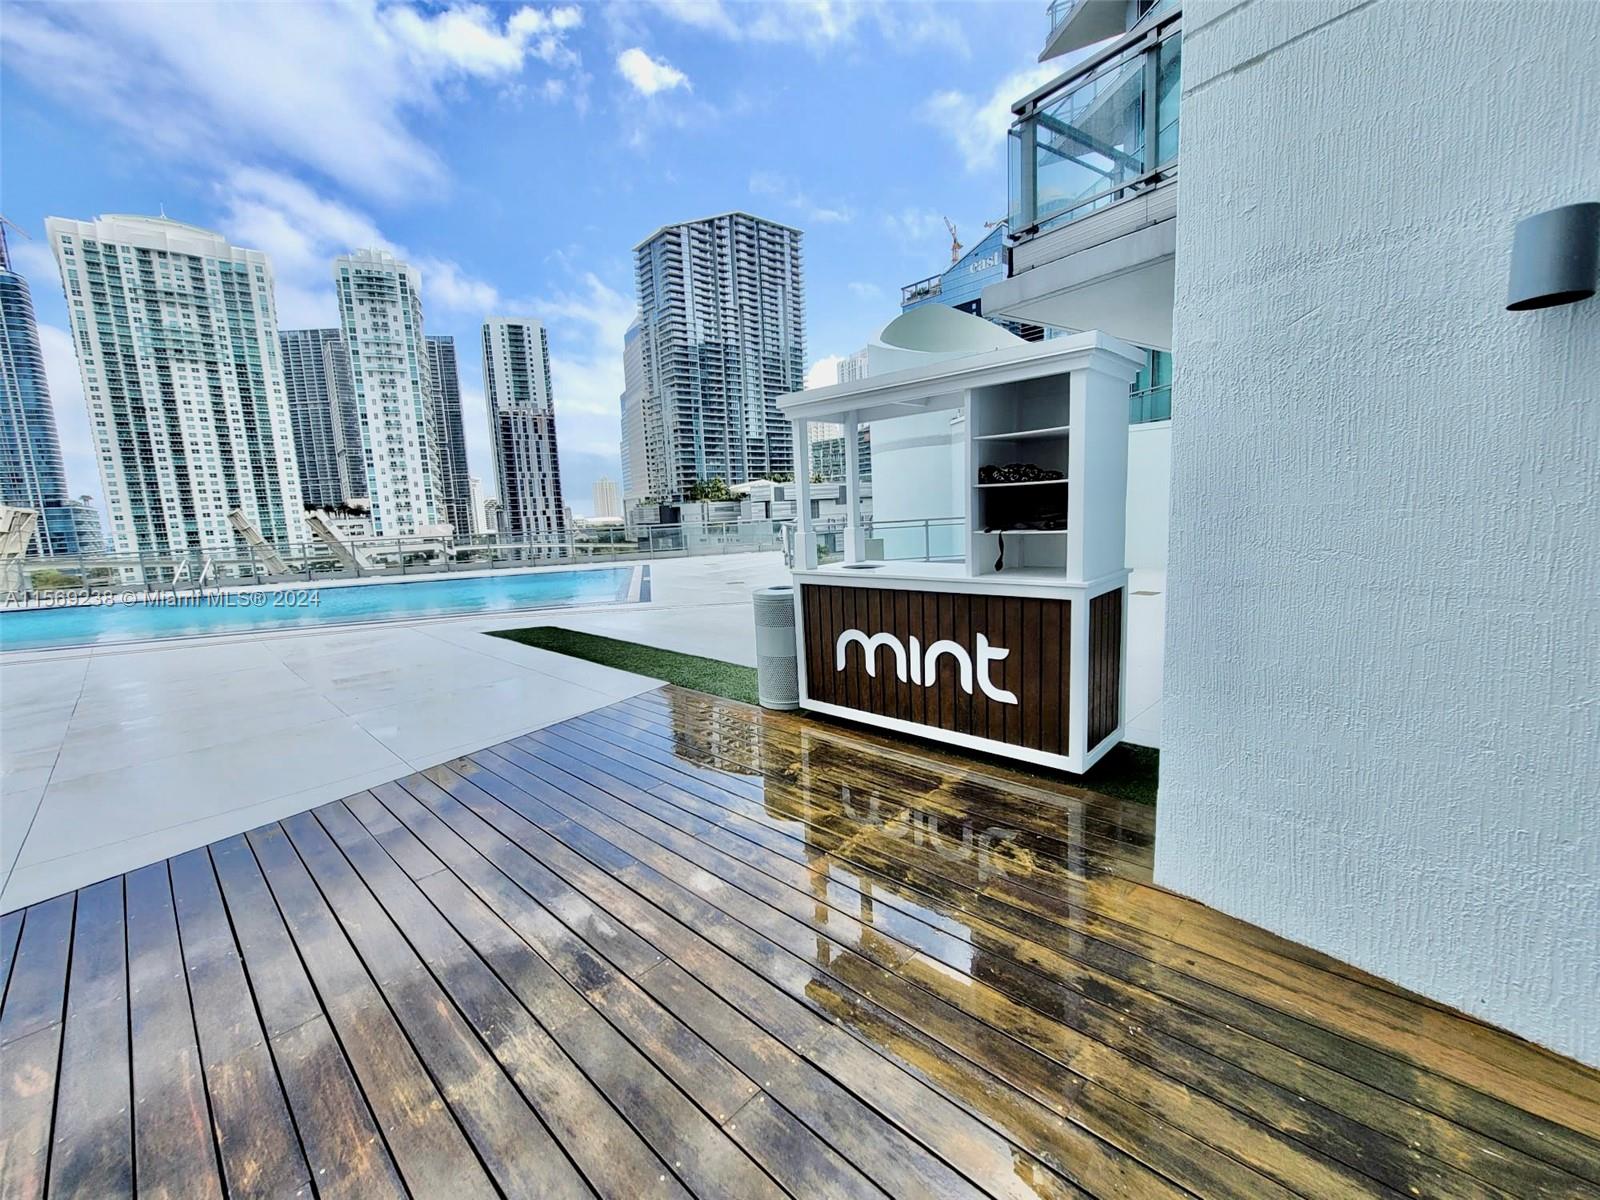 Luxury awaits in this spacious 1-bed, 1.5-bath haven at Mint Condominiums, overlooking Miami River near Brickell. Inside, sleek ceramic floors lead to a modern kitchen with stainless steel appliances. Relax in the master suite with large closet and dual-sink bathroom. Enjoy a guest half-bath, in-unit laundry, and stunning city views. Amenities abound: lap pool, jacuzzi, spa, sauna, gym, and more. With 24/7 concierge, valet, playroom, and billiards, every need is met. Explore Downtown, Wynwood, and beaches minutes away. Live the ultimate Miami lifestyle!